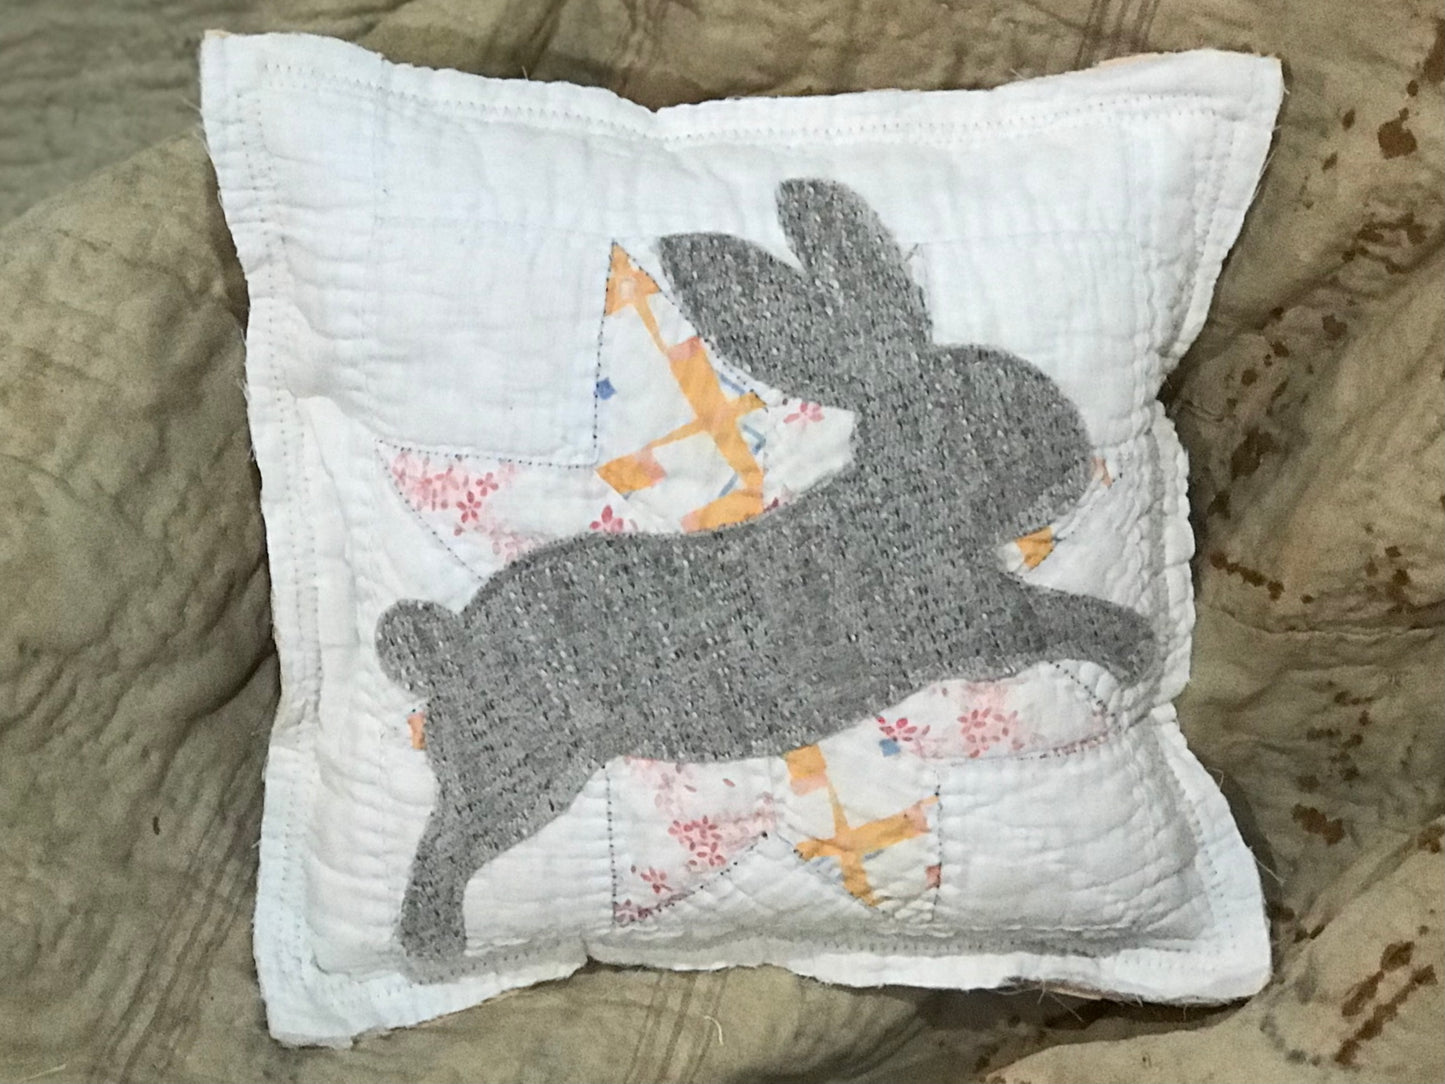 Pillow * Leaping Bunny 1